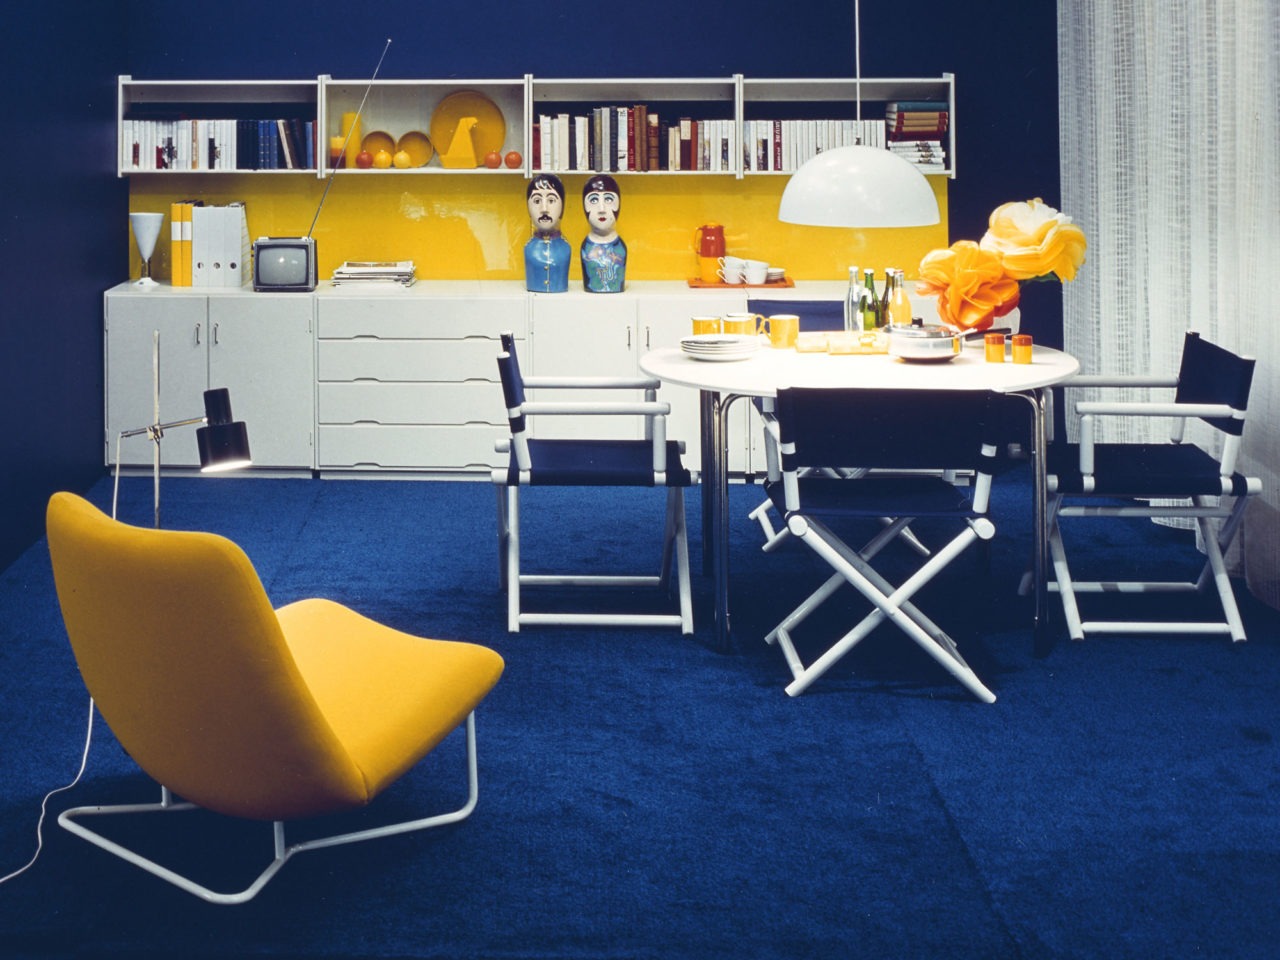 A completely blue, white and yellow room A long, white piece of storage furniture, director’s chairs around a dining table, a banana-like easy chair, blue rug.